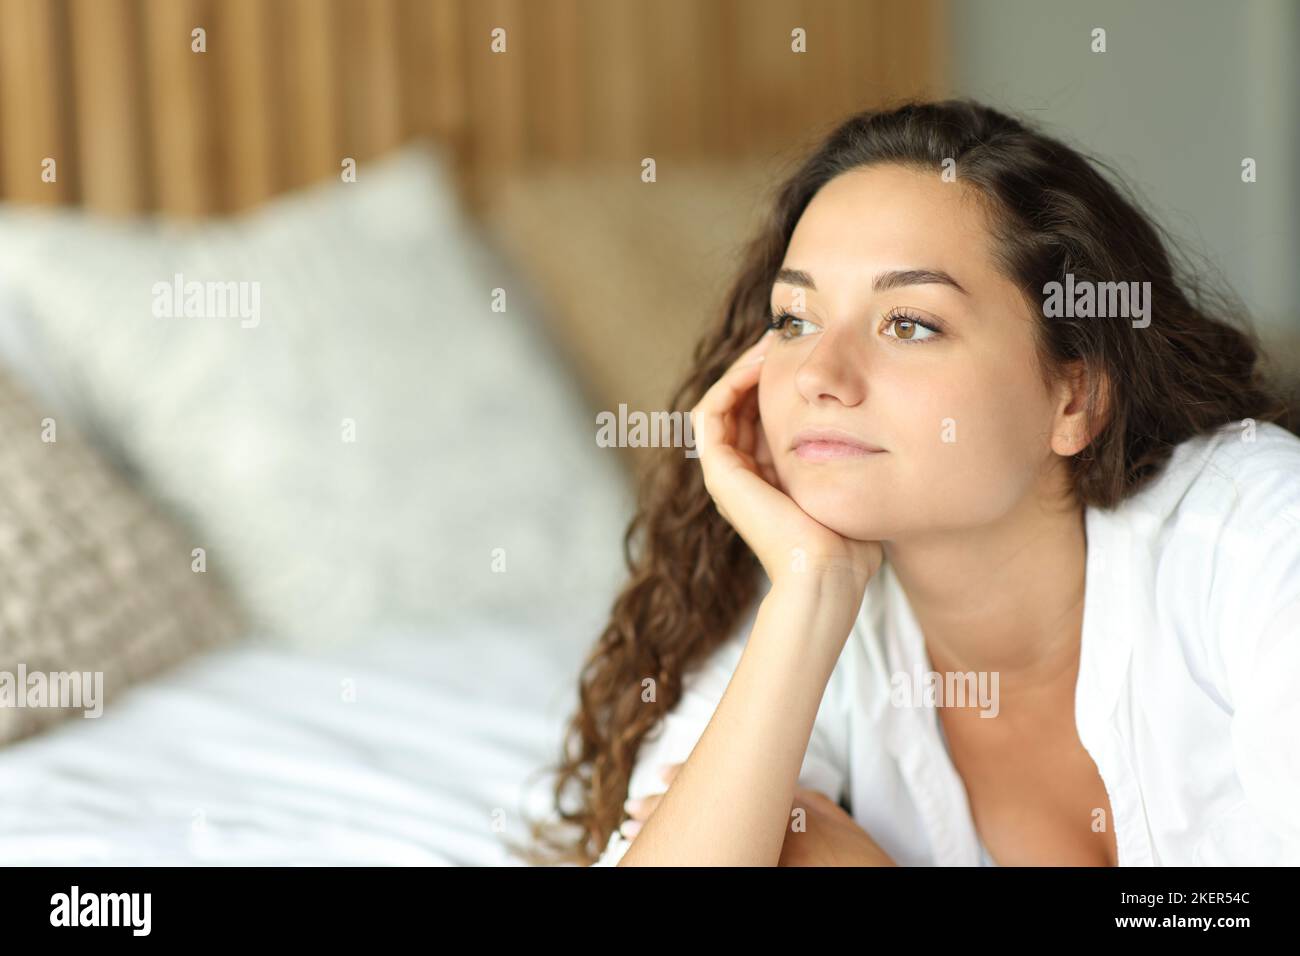 Pensive serious woman lying on a bed looking away in the bedroom Stock Photo